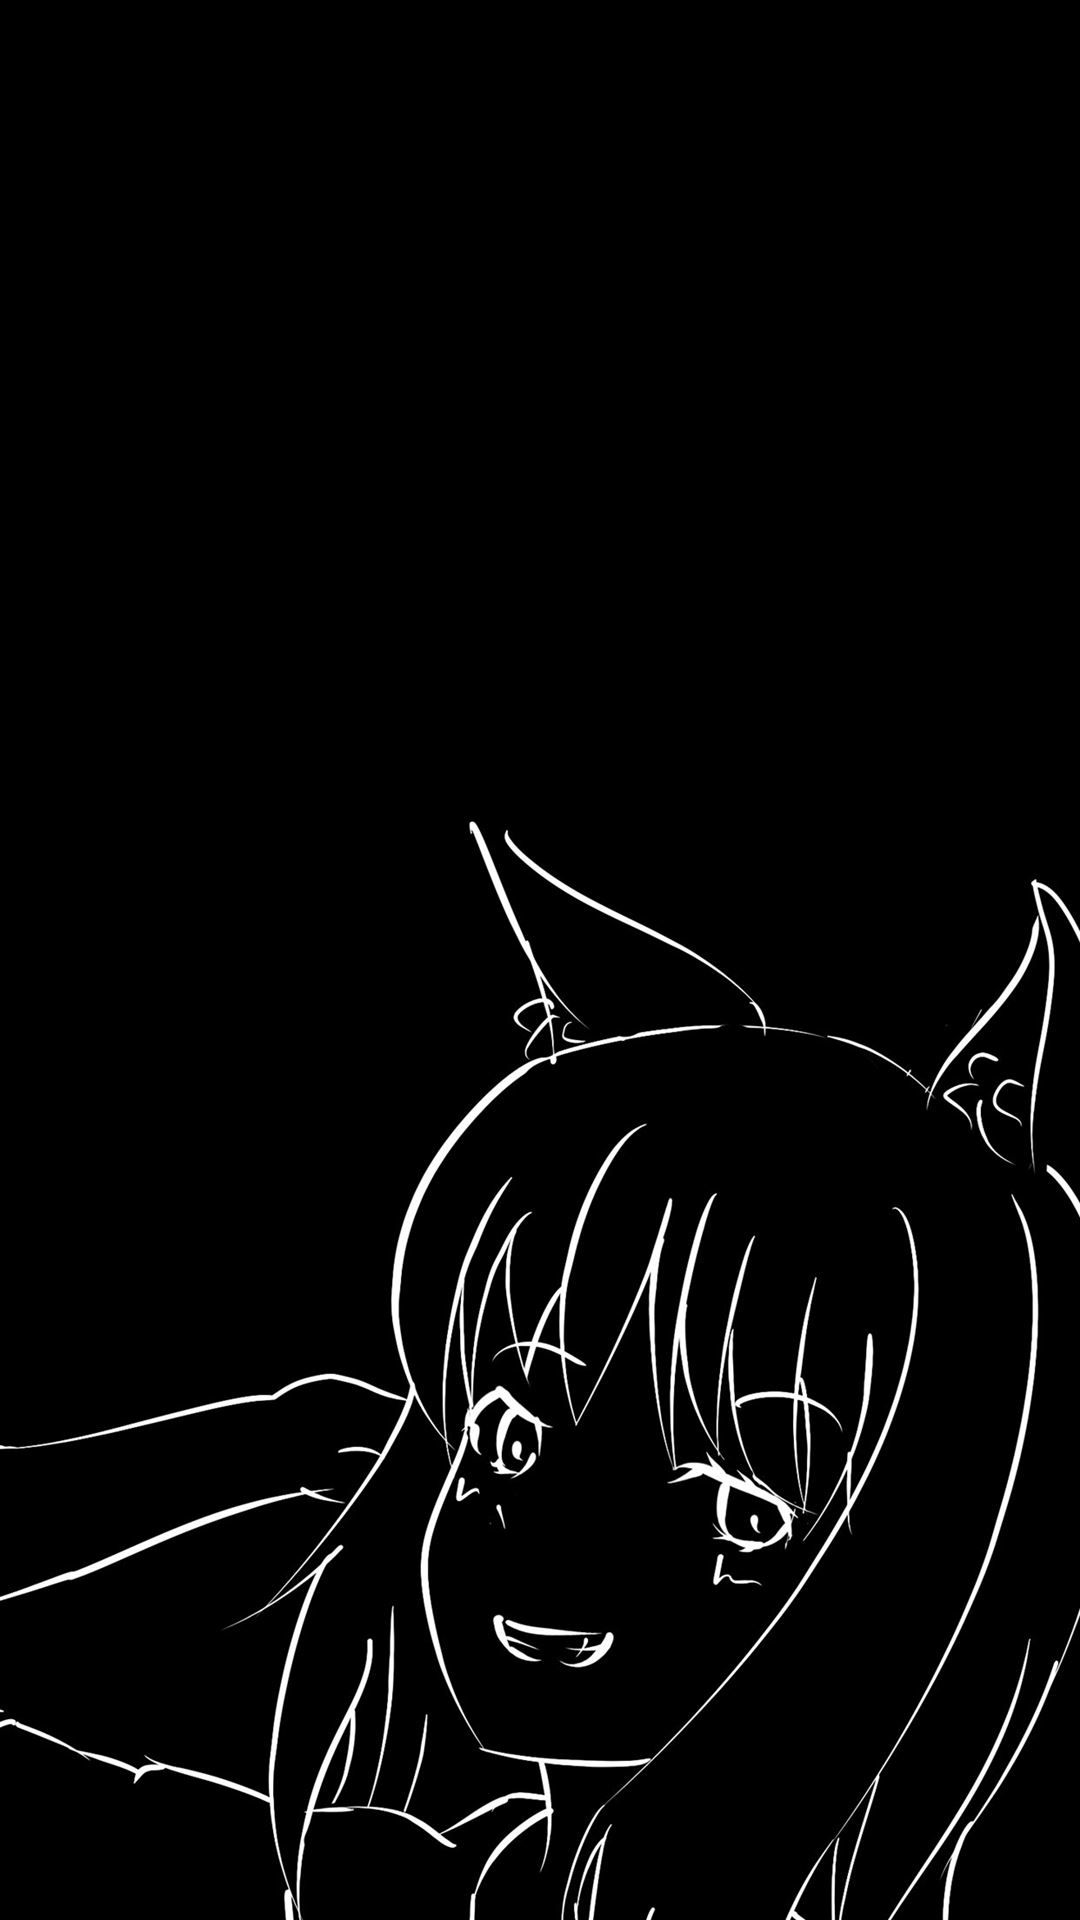 Black And White Aesthetic Anime Hd Wallpapers Wallpaper Cave B o r i s on twitter anime eyes are my aesthetic. black and white aesthetic anime hd